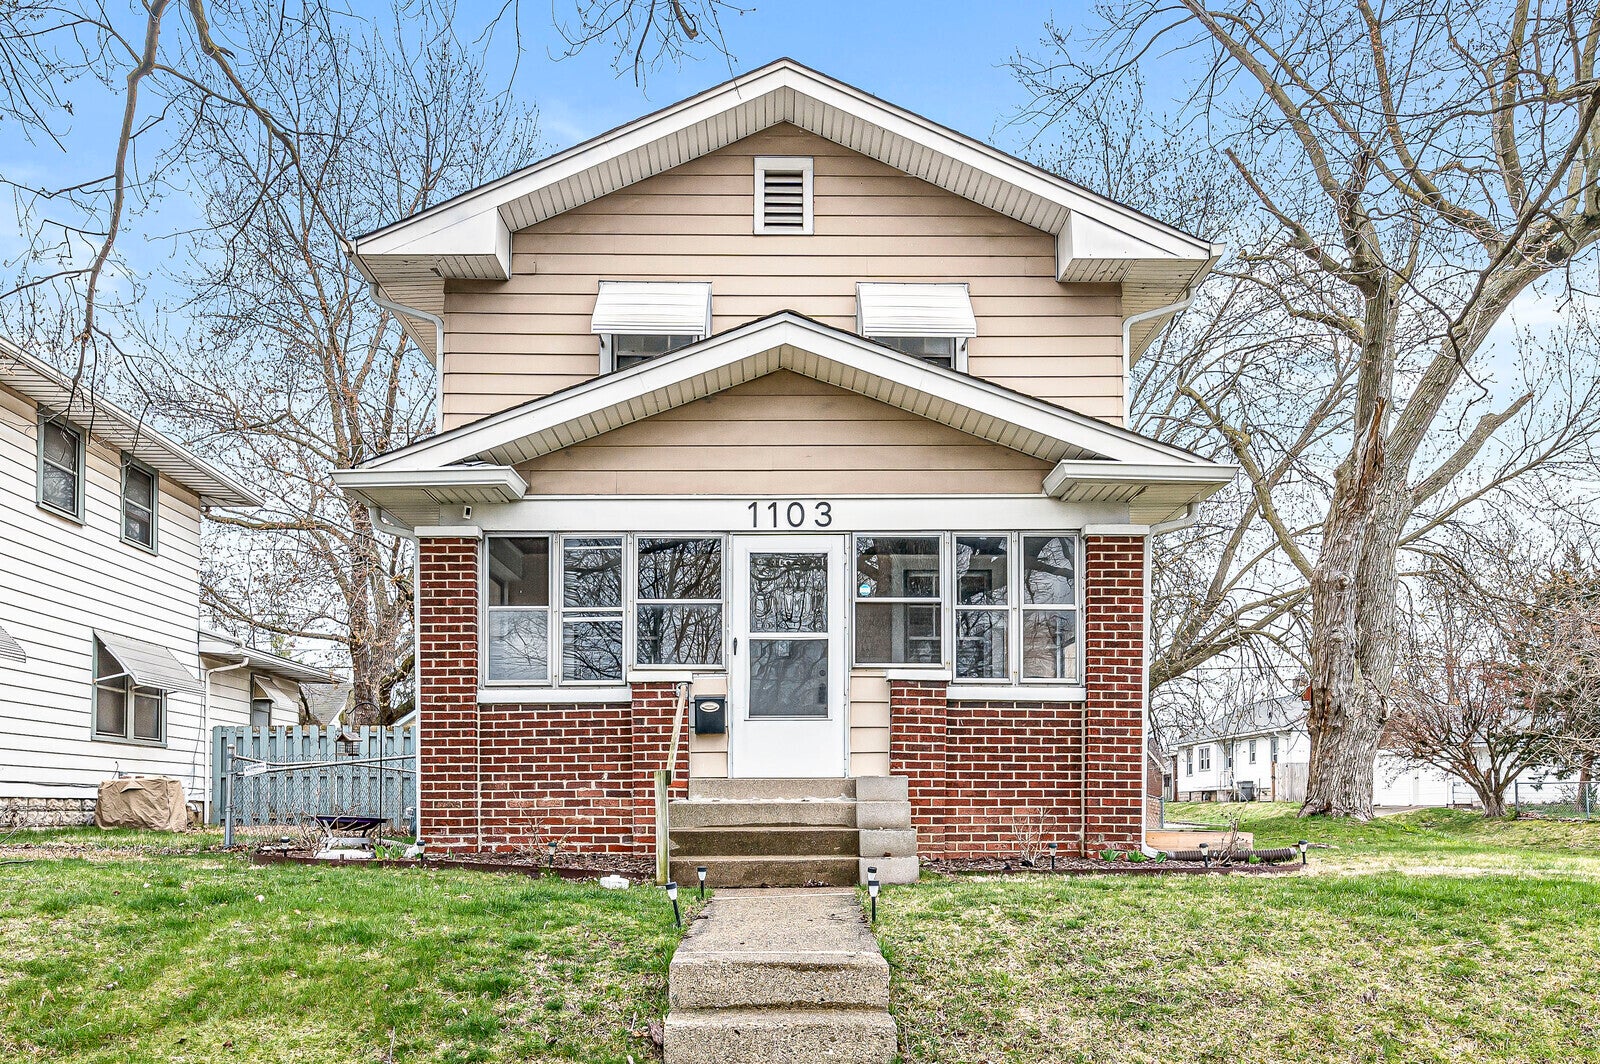 Photo of 1103 N Linwood Avenue Indianapolis, IN 46201